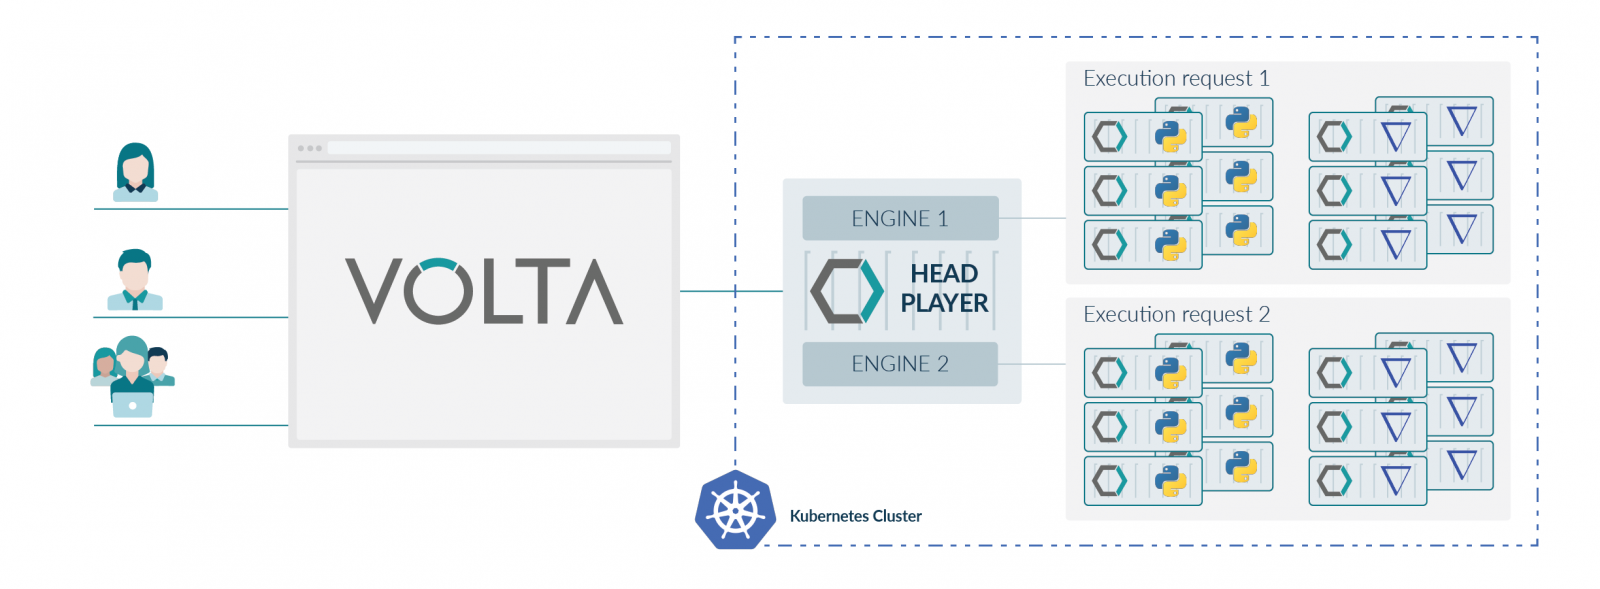 VOLTA Elastic Distributed Execution uses Docker containers orchestrated in a Kubernetes cluster